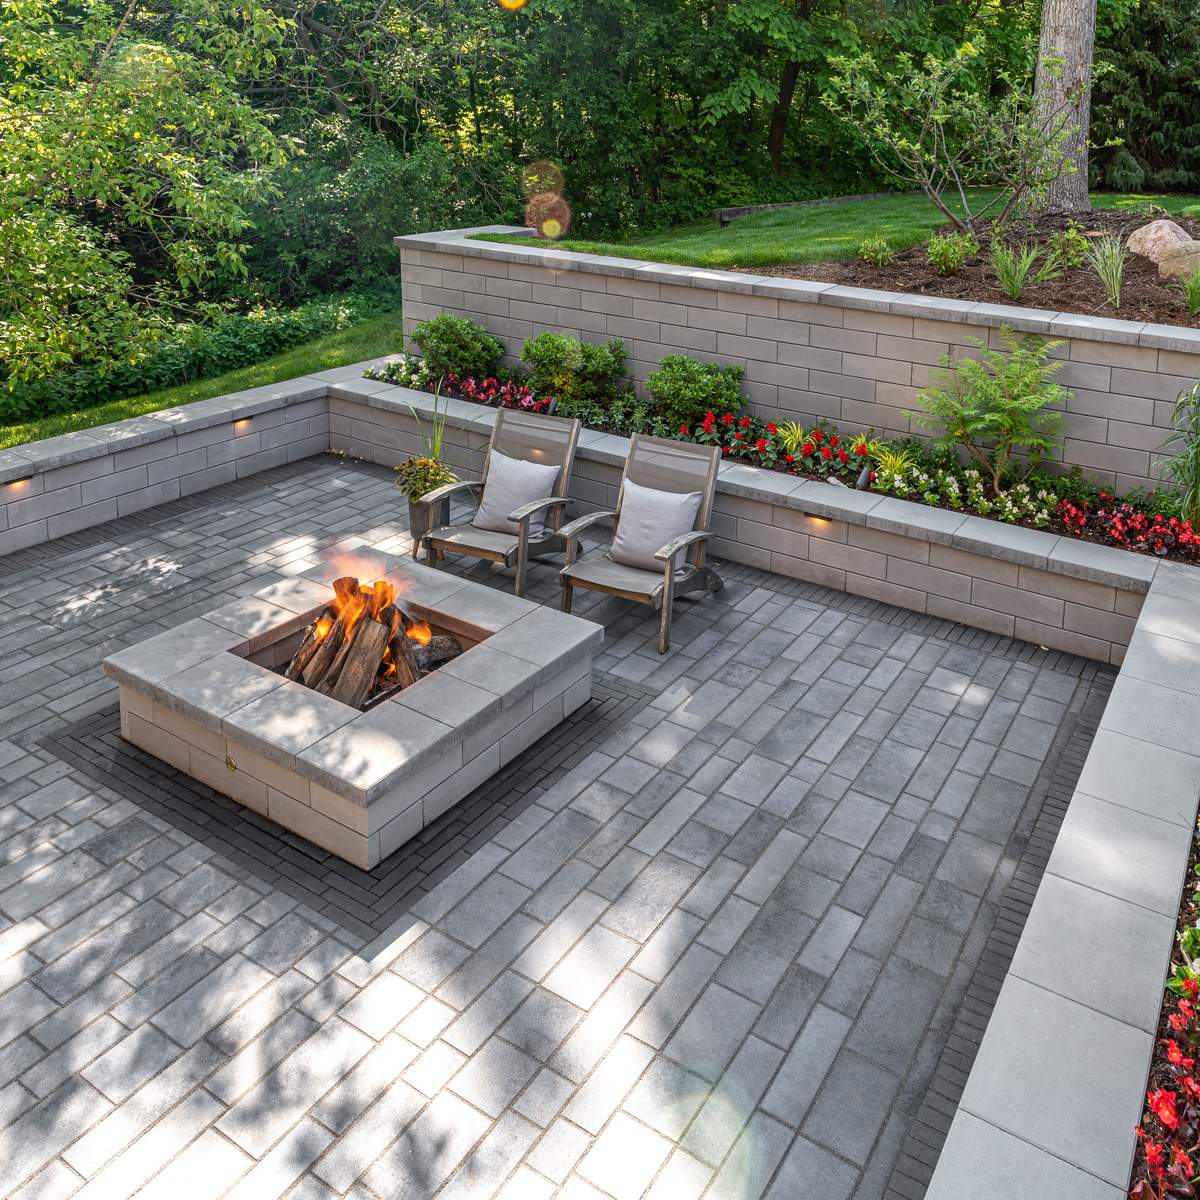 Landscaping Stones 101: Which Ones Will Work Best for Your Next